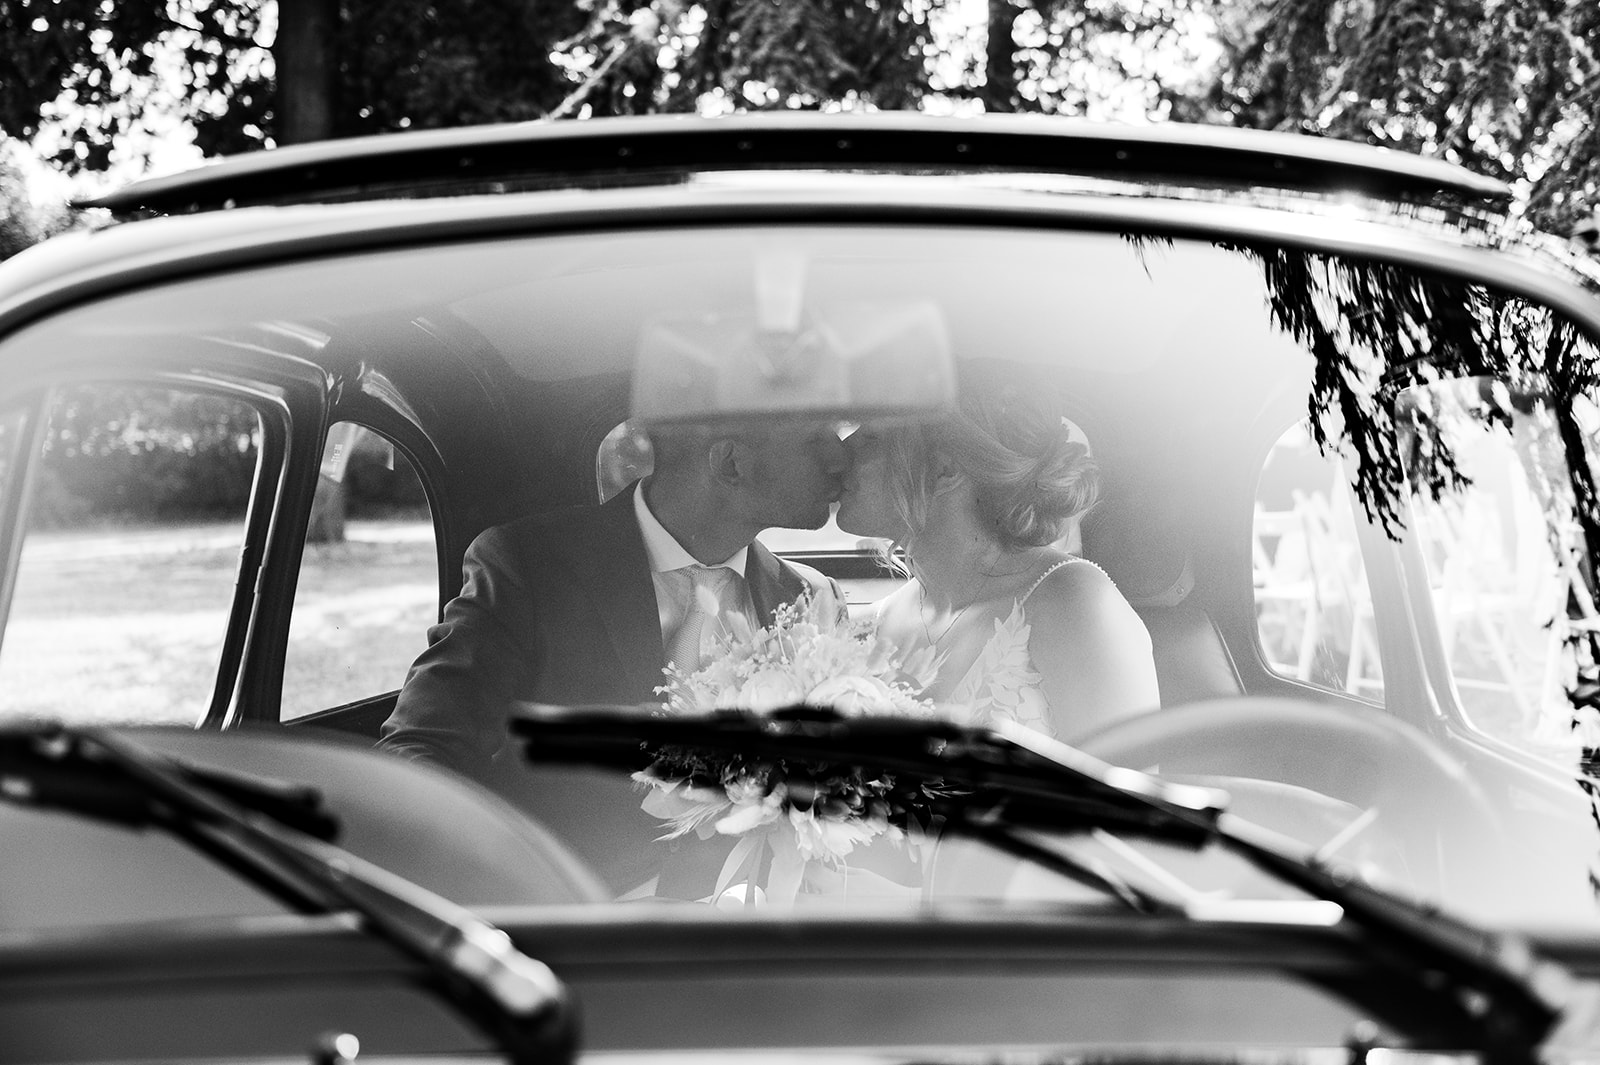 bride and groom sit in back seat of vintage car and kiss